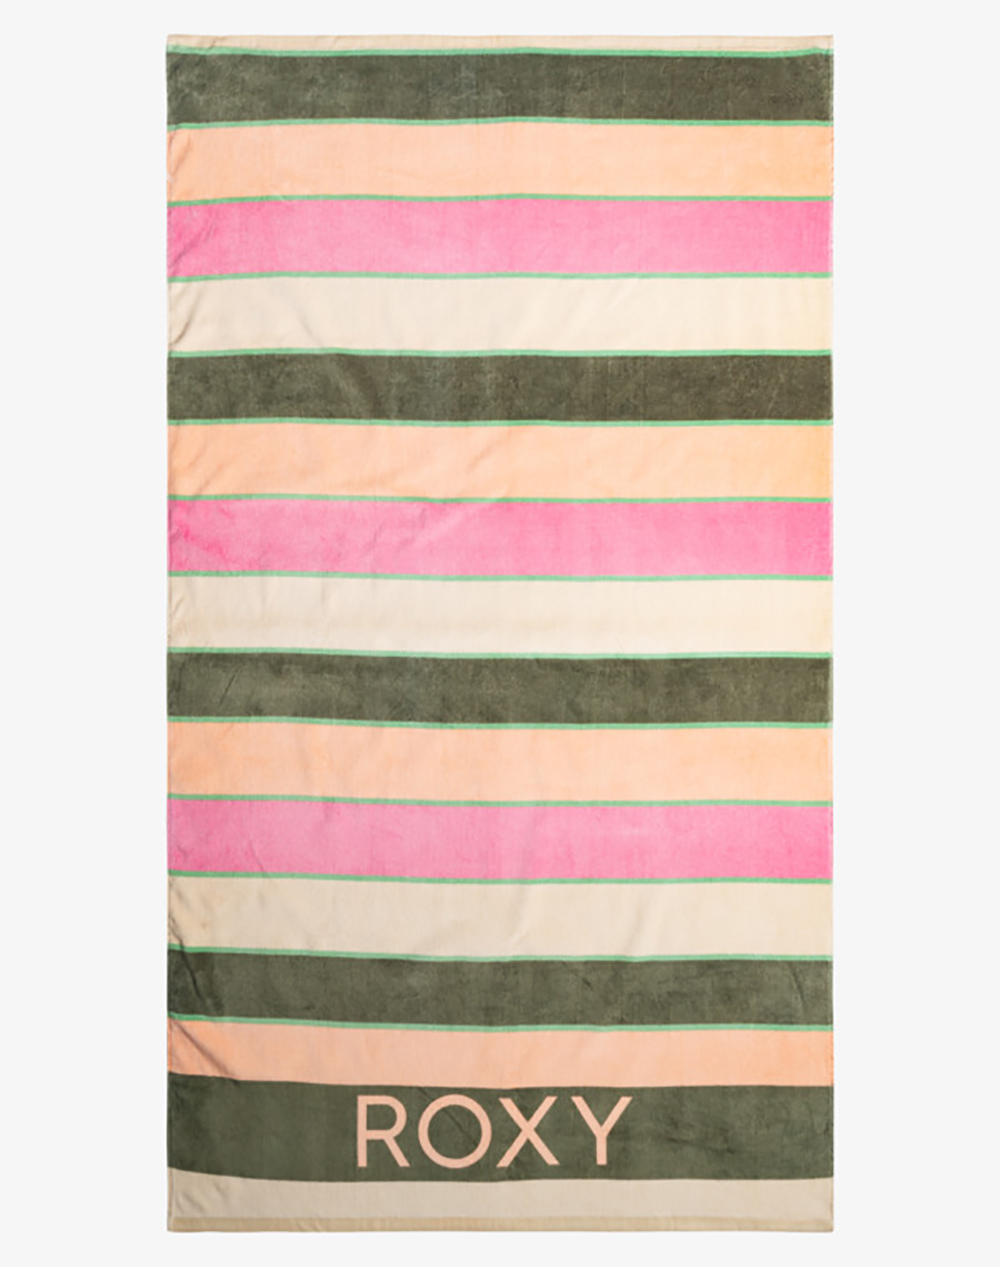 ROXY COLD WATER PRINTED WOMENS ACCESSORIES (Dimensions: 160 x 90 cm)